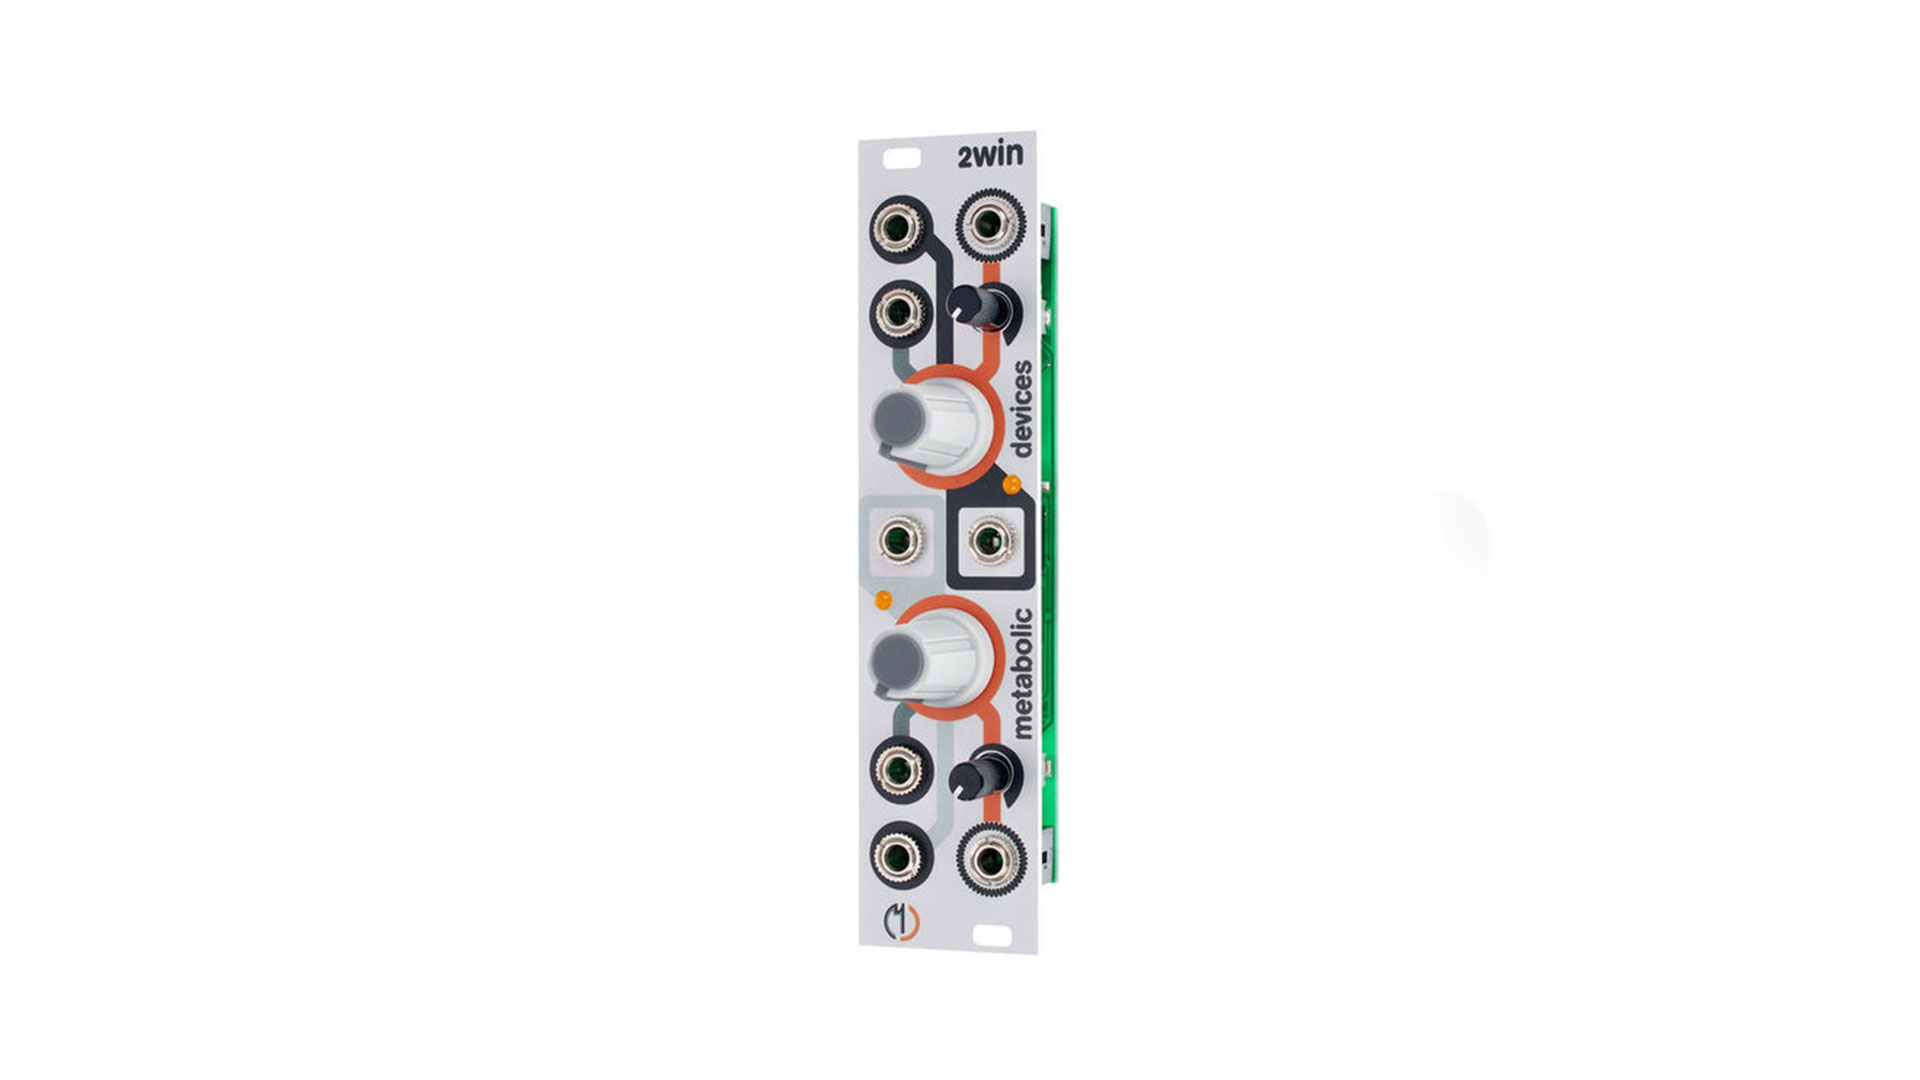 Top Sample and Hold Modules